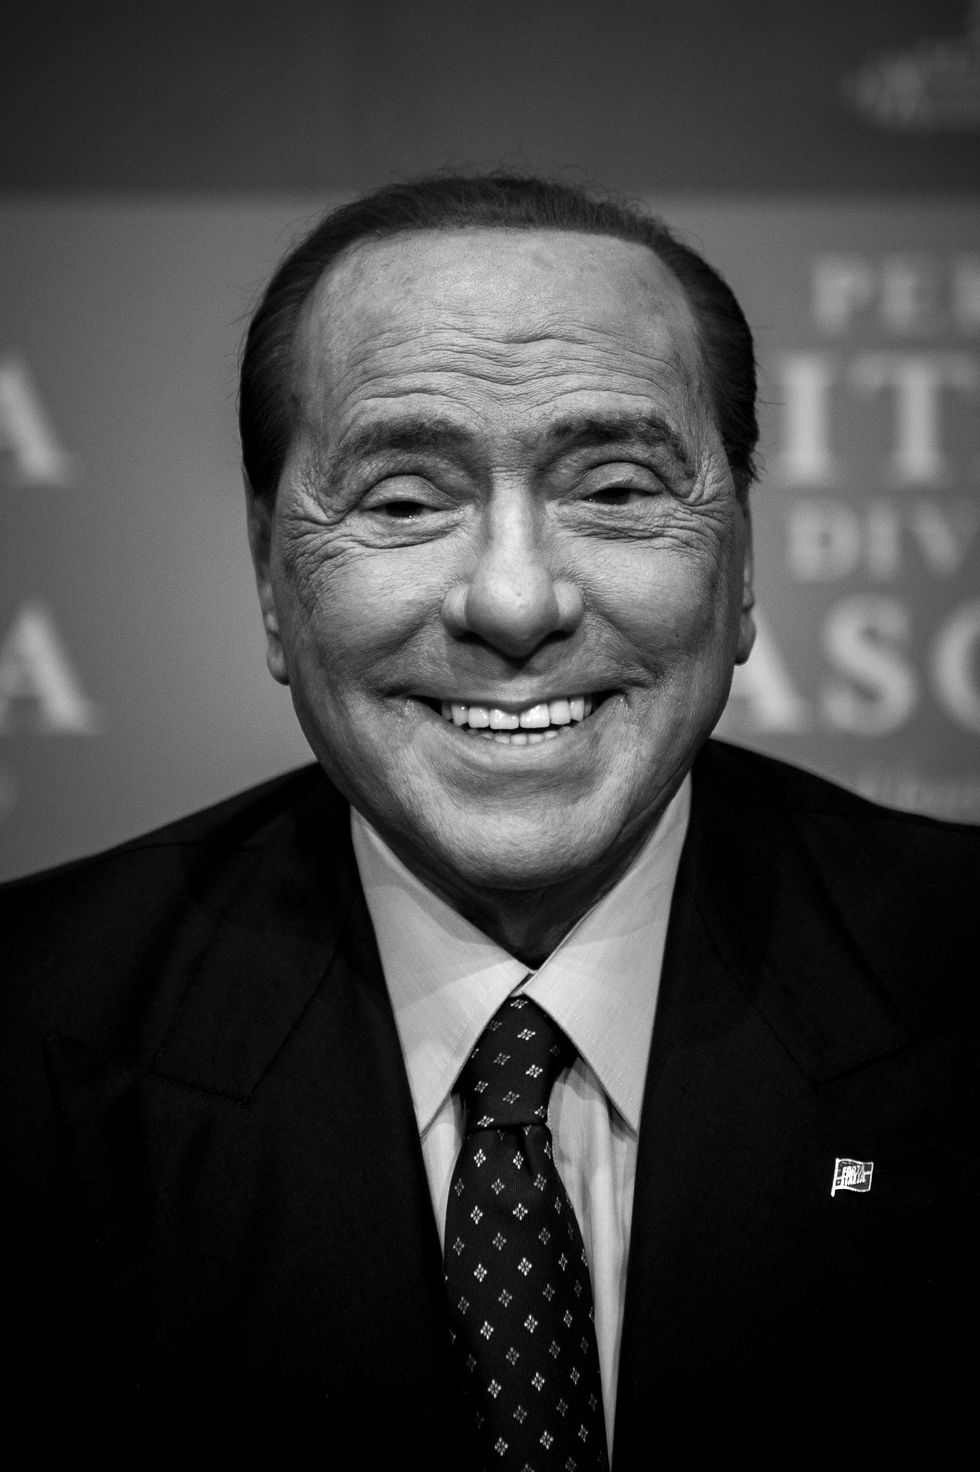 rome, italy december 19 editors note image has been converted to black and white forza italia leader silvio berlusconi attends the presentation of the new book perché litalia diventò fascista by italian writer bruno vespa, on december 19, 2019 in rome, italy photo by antonio masiellogetty images